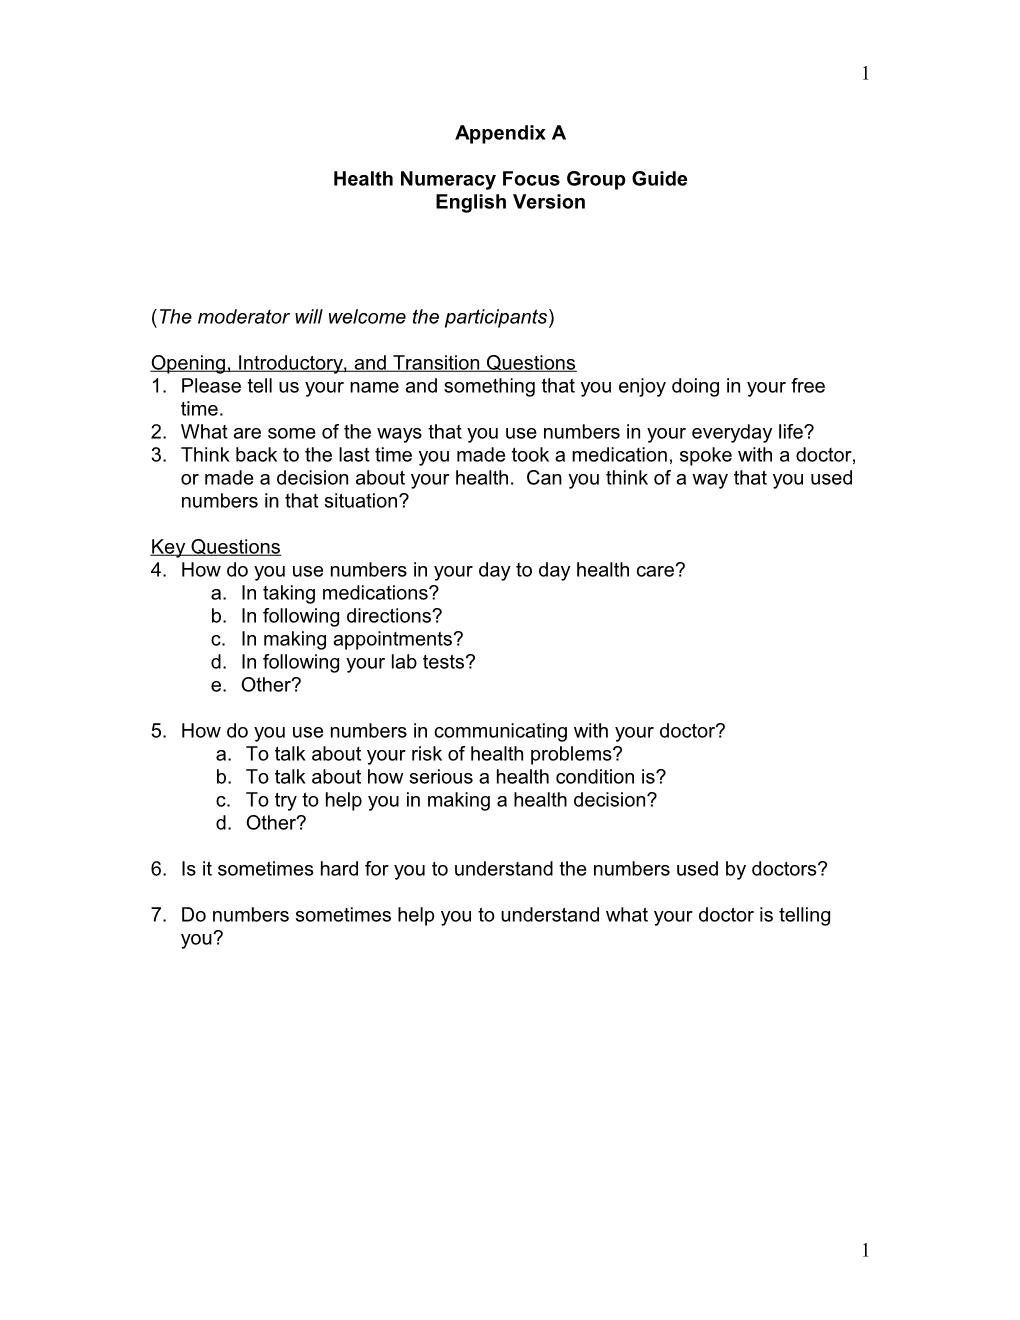 Health Numeracy Focus Group Guide